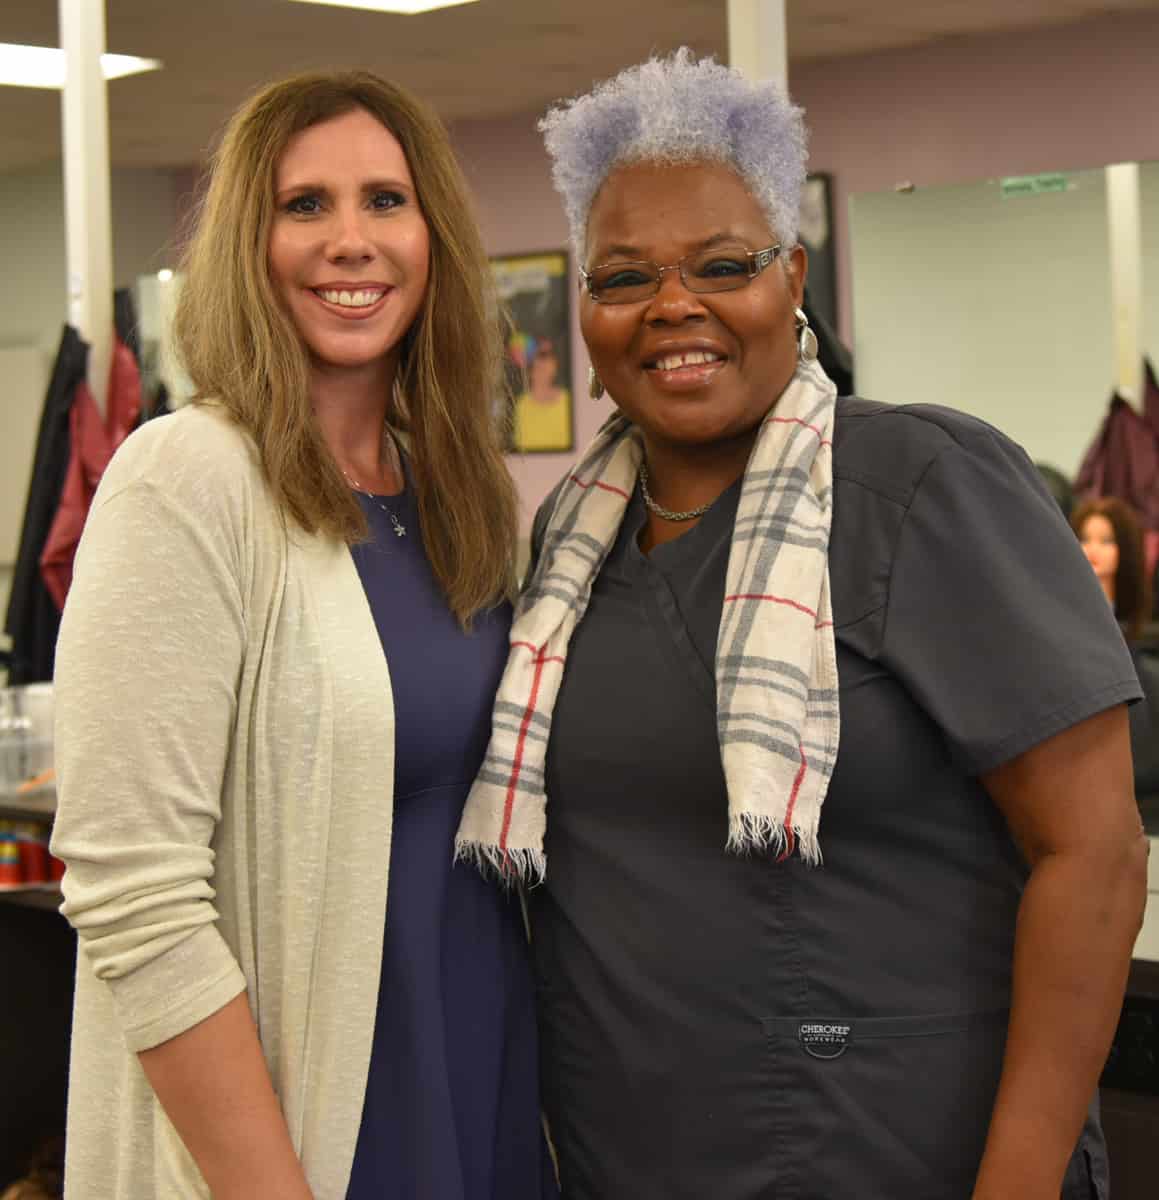 SGTC graduate Janice Goodin is shown above with SGTC Cosmetology Instructor Dorothea Lusane McKenzie.